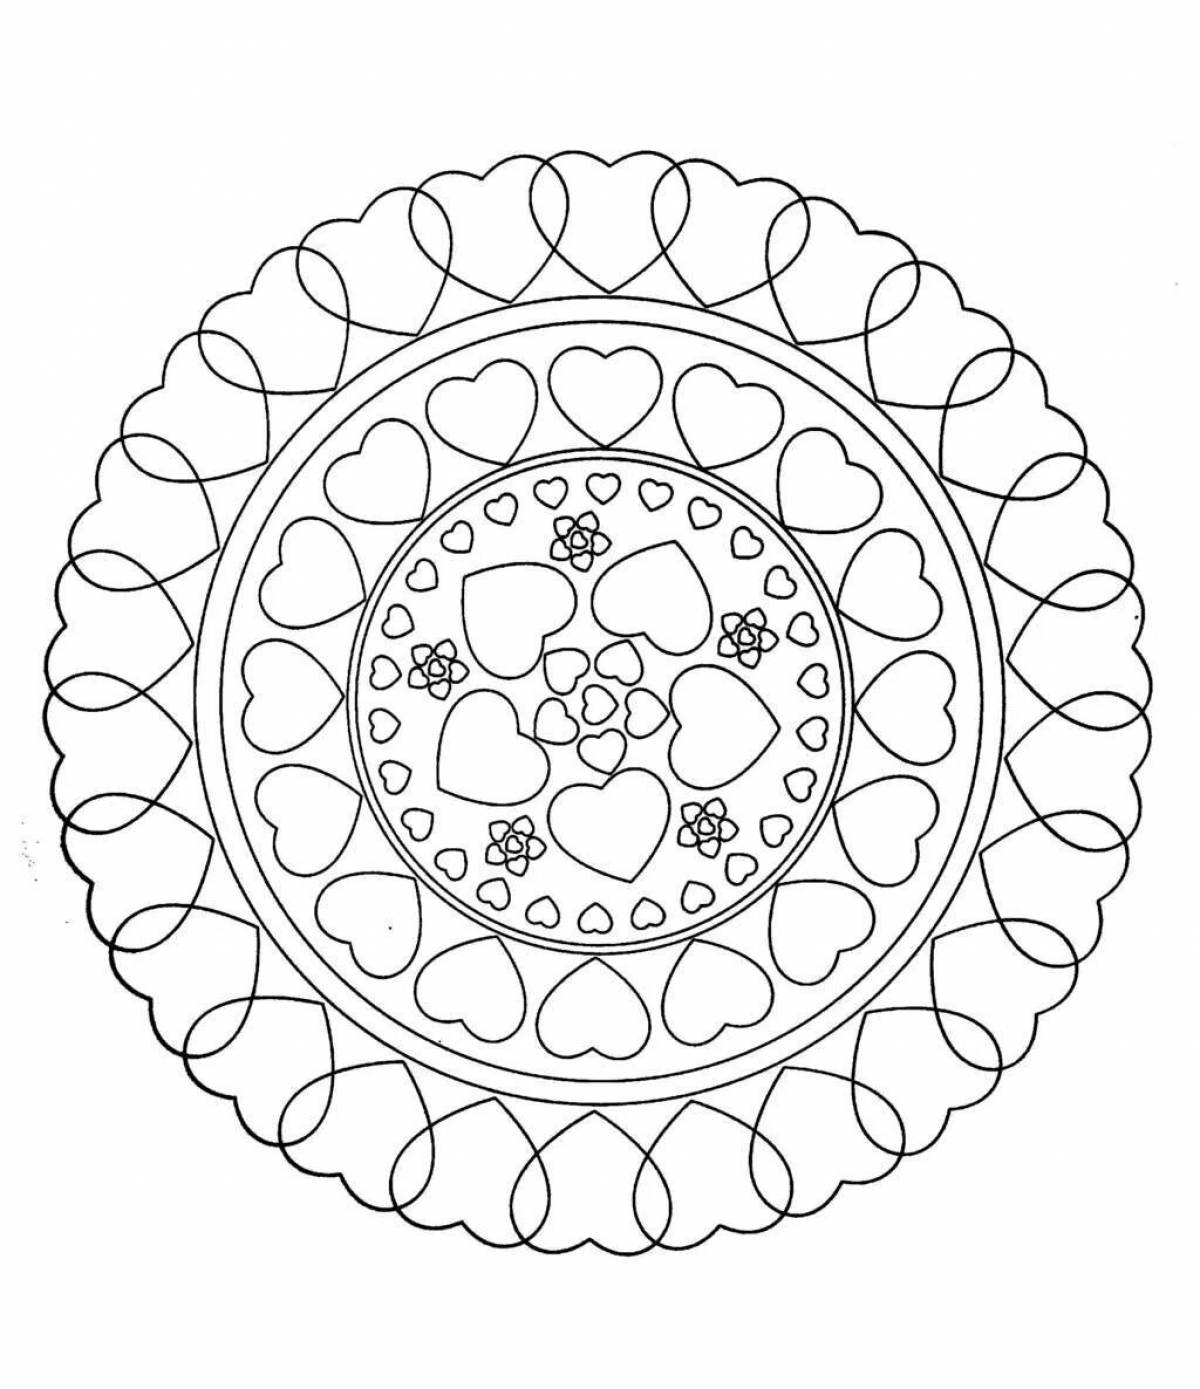 Positive mantra coloring page